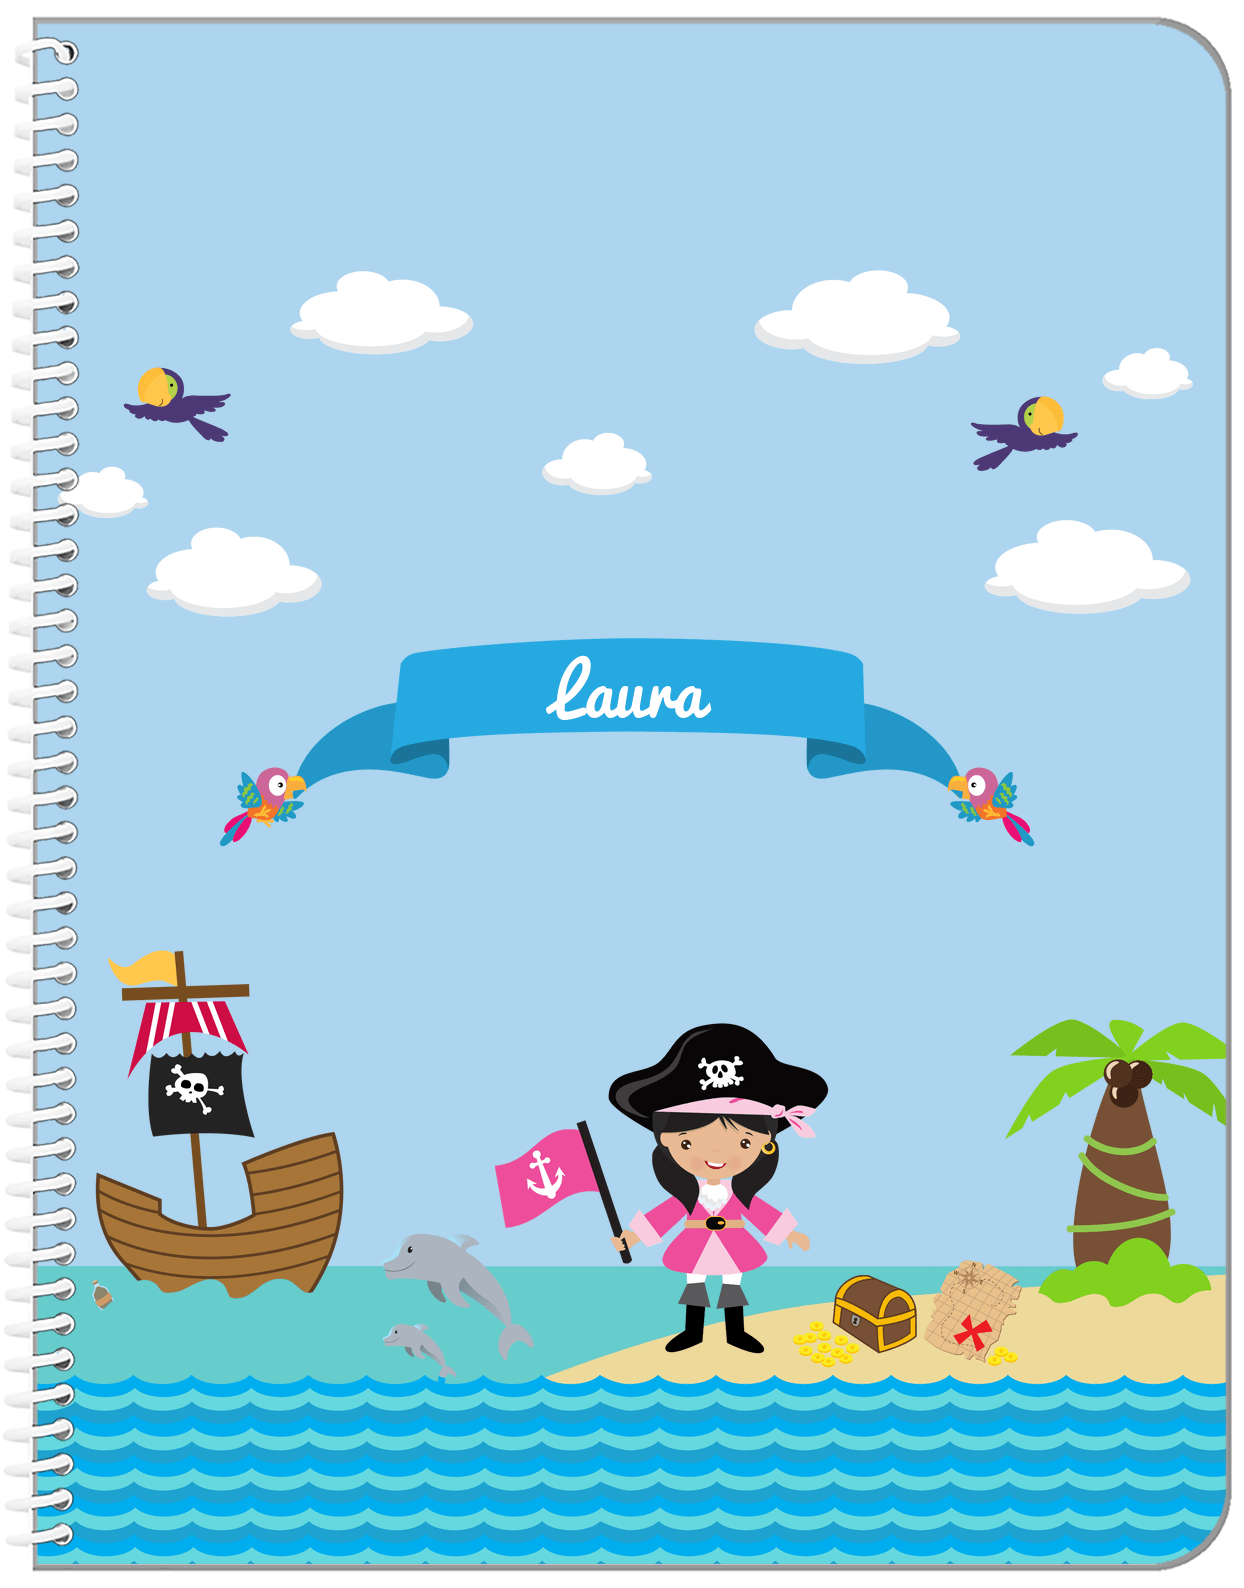 Personalized Pirate Notebook I - Girl Pirate with Flag - Black Hair Girl - Front View